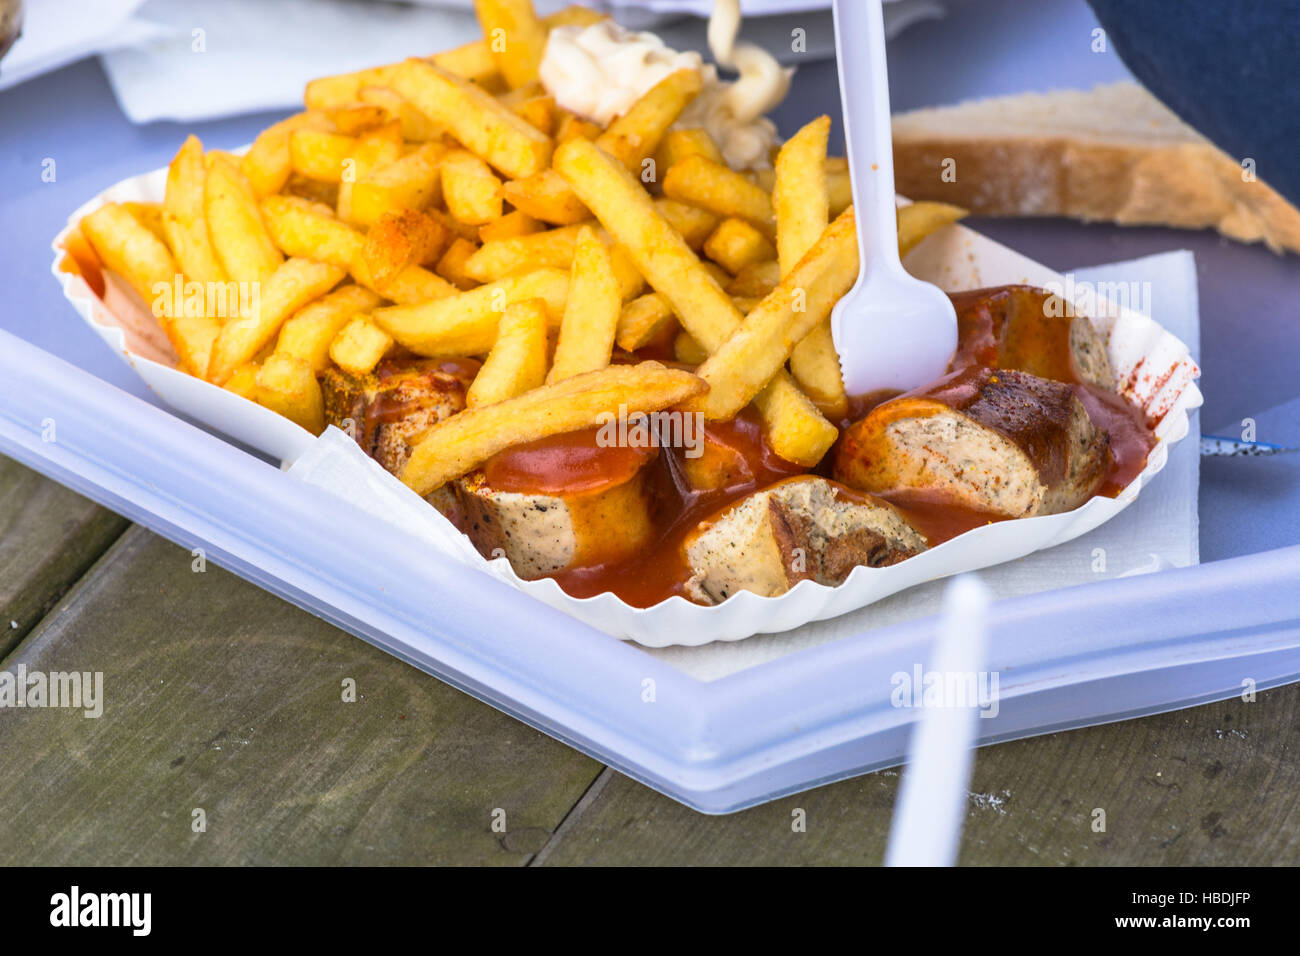 French Fries Small Brown Paper Bag Stock Photo 70507747